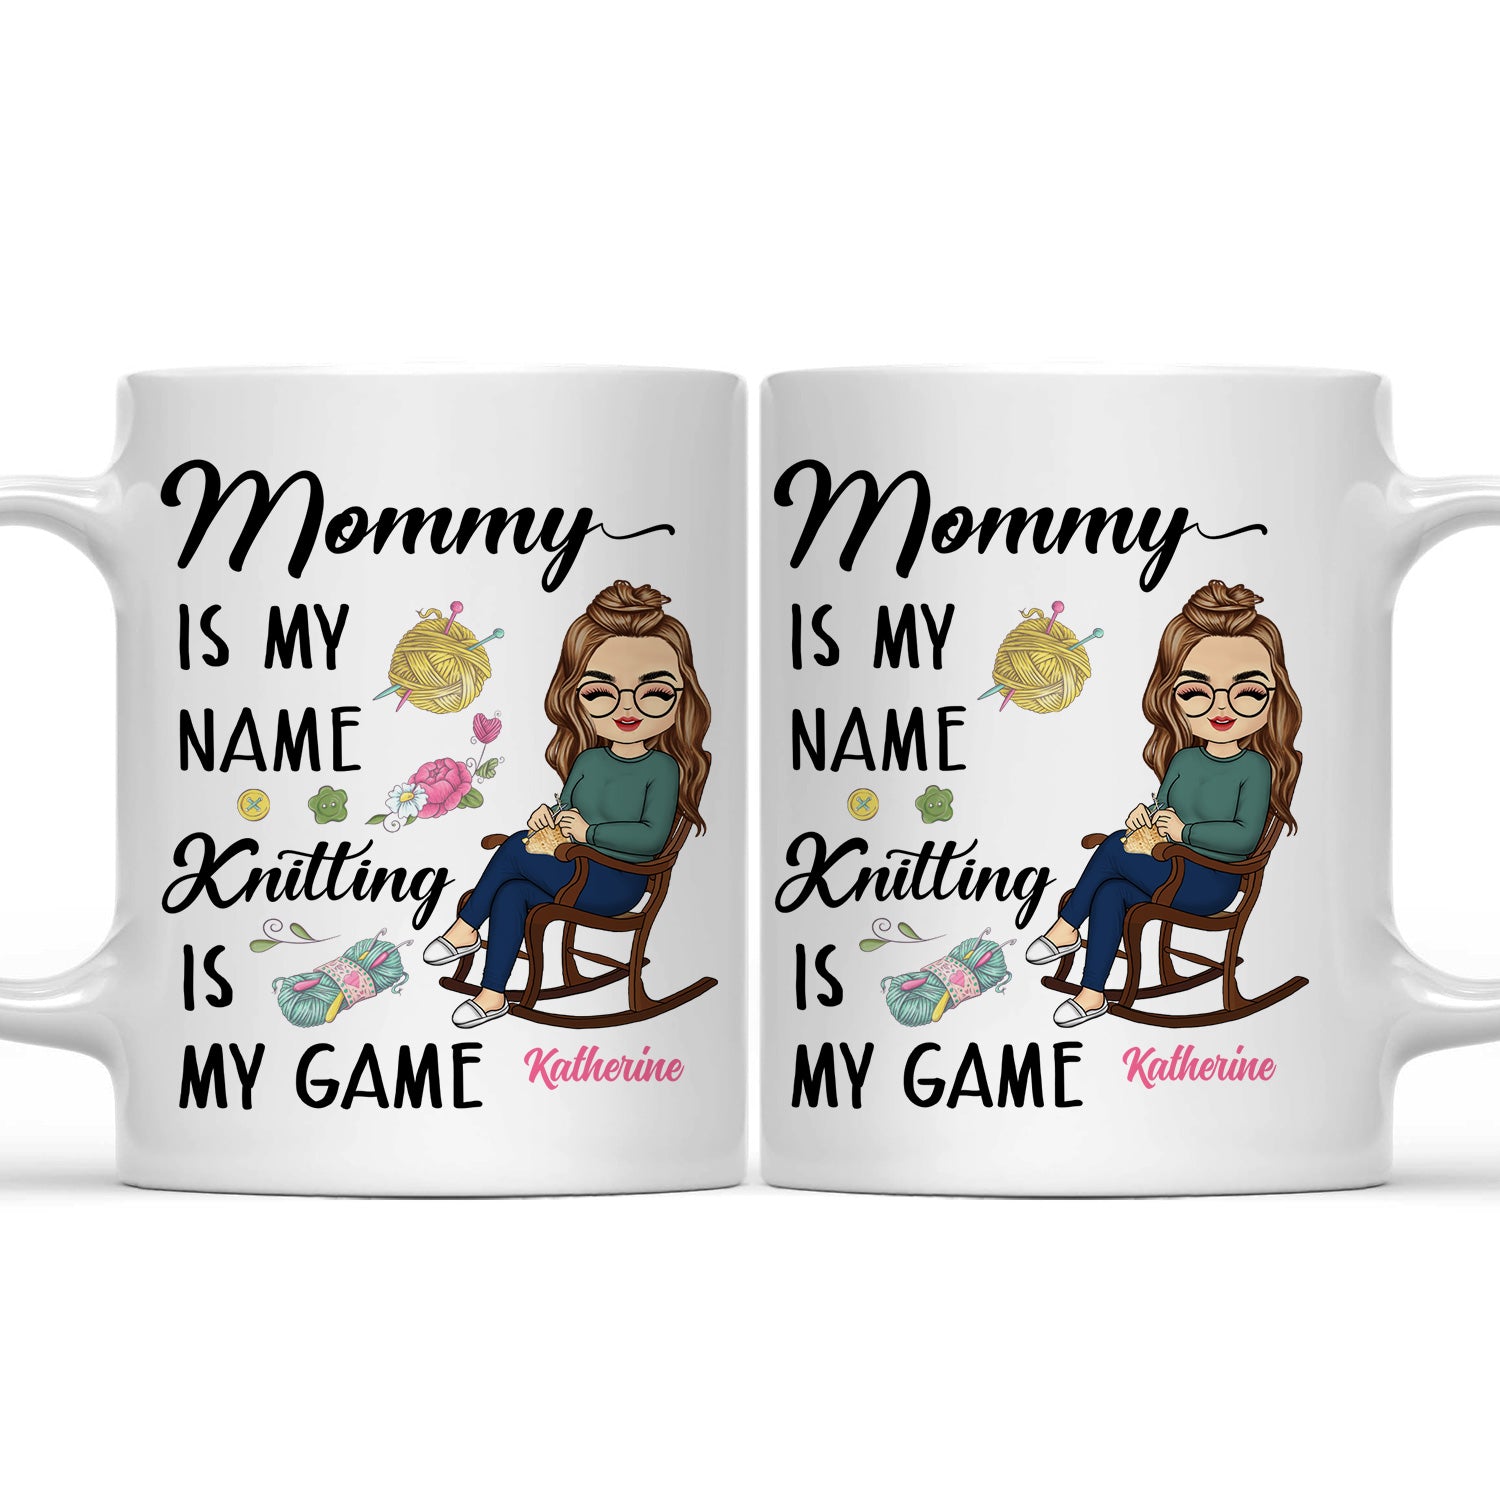 Knitting Is My Game - Gift For Mother - Personalized Mug